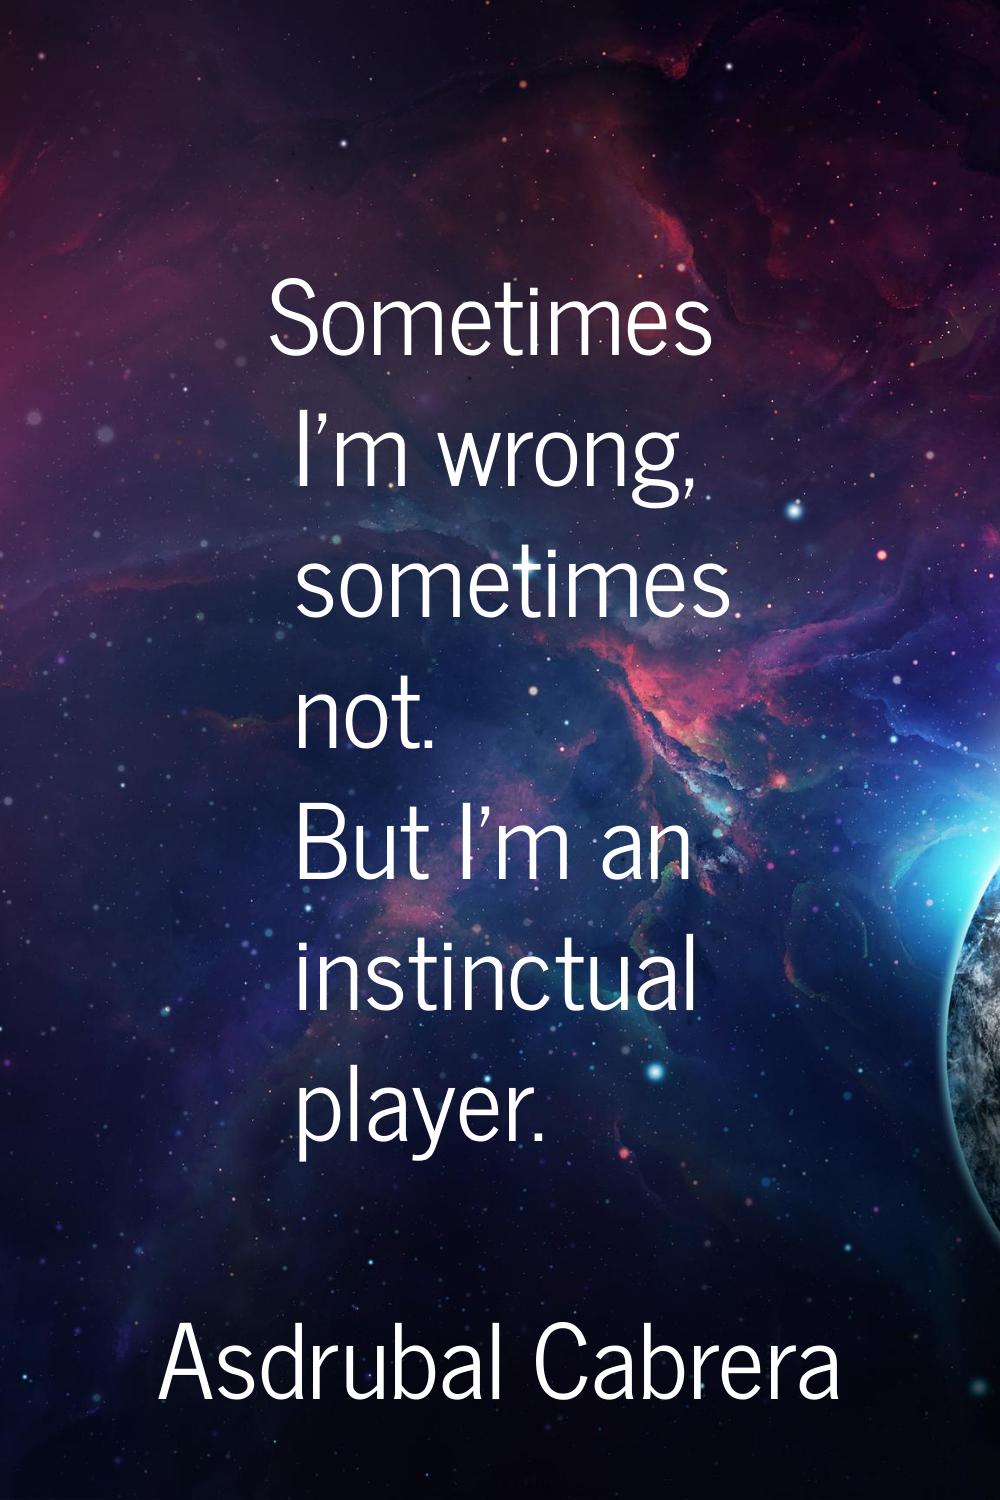 Sometimes I'm wrong, sometimes not. But I'm an instinctual player.